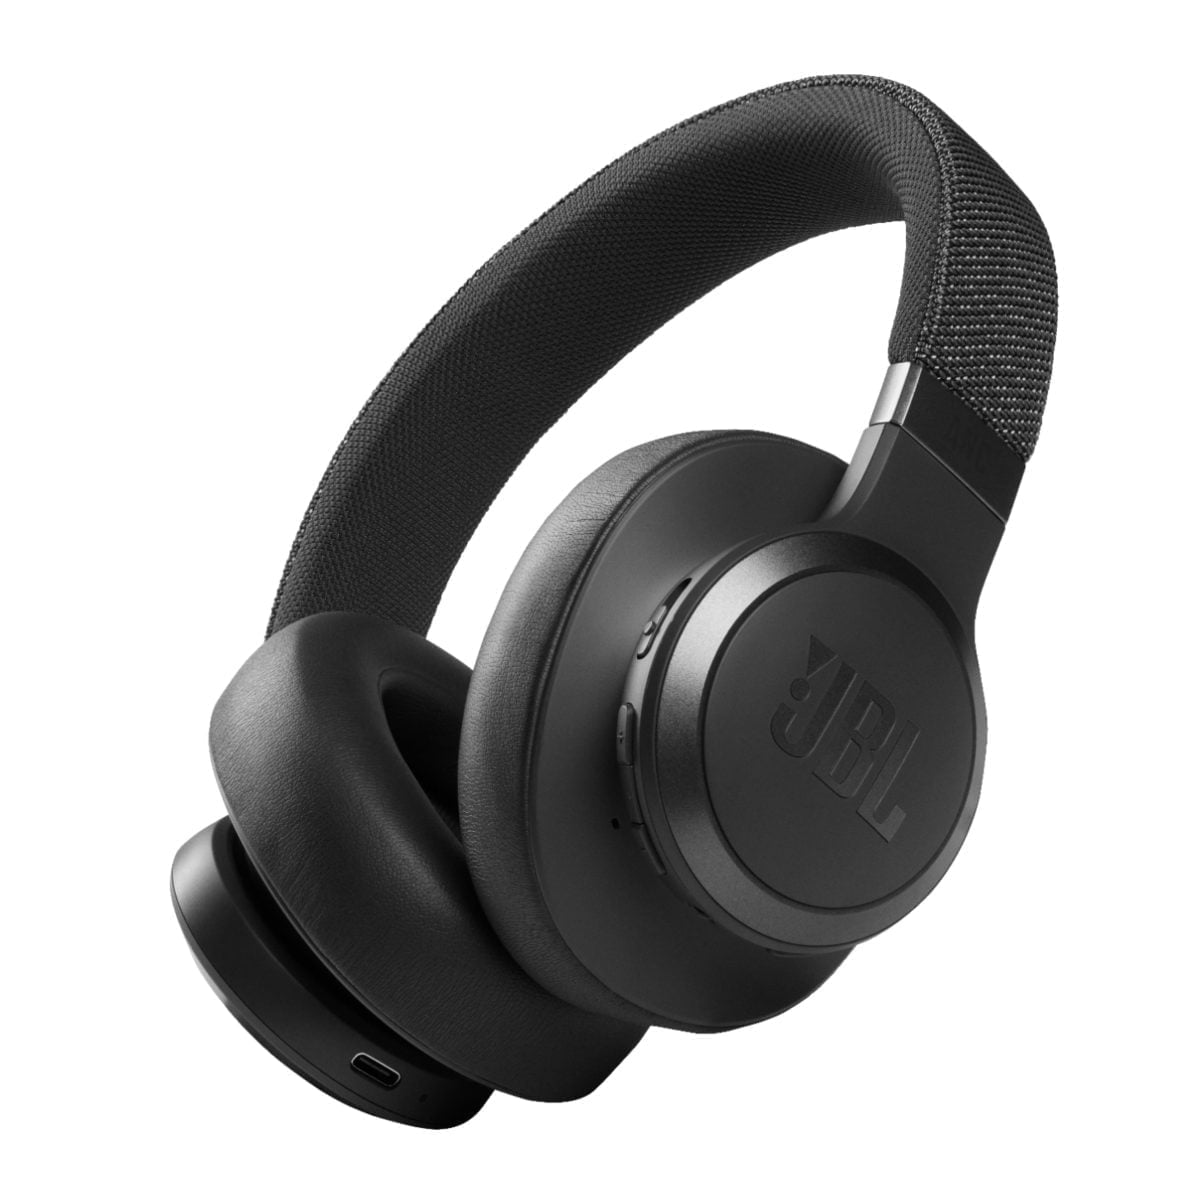 6463749 Rd Scaled Jbl &Amp;Lt;H1&Amp;Gt;Jbl Live 660Nc Wireless Noise Cancelling Headphones - Black&Amp;Lt;/H1&Amp;Gt; Https://Www.youtube.com/Watch?V=Lr2Xbmbdmey In Your World, Music Is Essential, So Slip On A Pair Of Jbl Live 660Nc And Elevate Your Day. Feel The Power Of Jbl Signature Sound Delivered By 40Mm Drivers, Enjoy The Convenience Of Adaptive Noise Cancelling And Smart Ambient Technologies That Allow You To Focus On What Matters For You, And Talk To Your Favorite Voice Assistant With A Tap On The Ear Cup. Rock Out Uninterruptedly For 50 Hours! Jbl Jbl Live 660Nc Wireless Noise Cancelling Headphones - Black